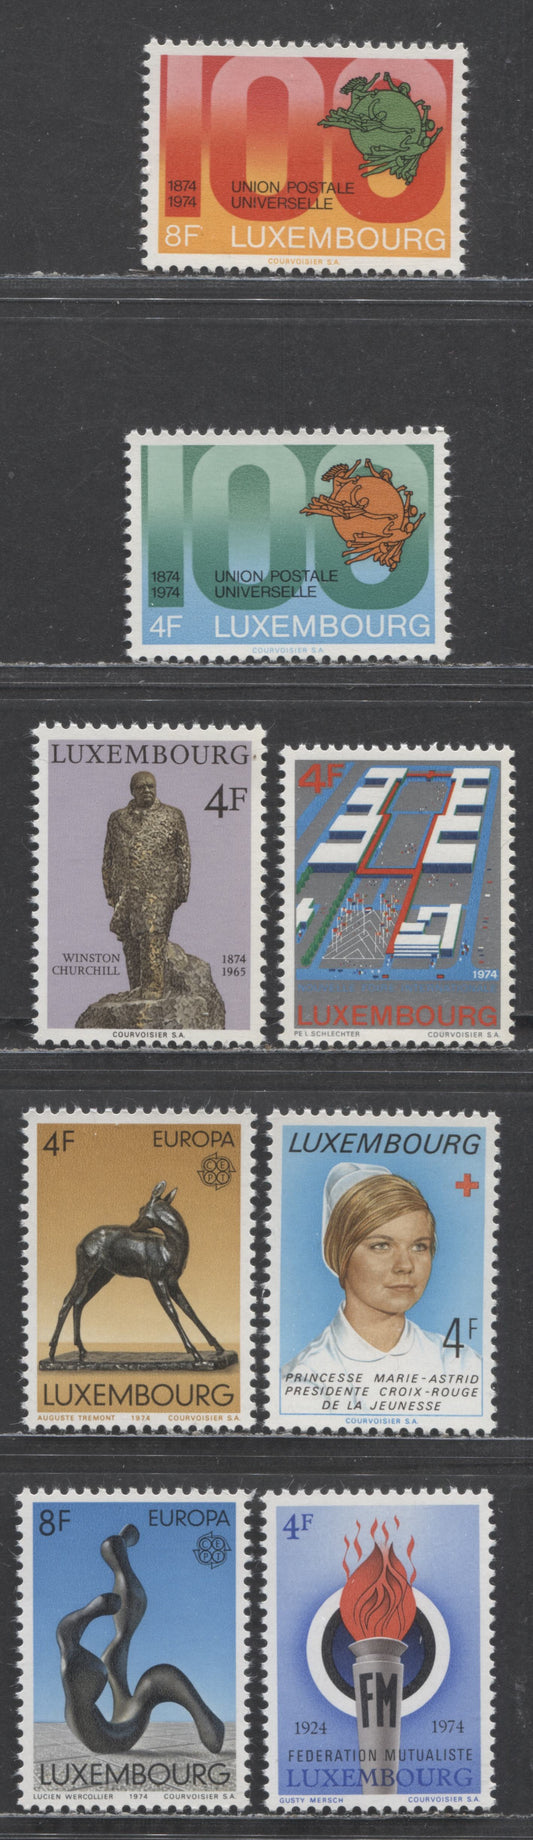 Luxembourg SC#540/552 1974 Princess Marie-Astrid & UPU Centenary Issues, 8 VFNH Singles, Click on Listing to See ALL Pictures, 2022 Scott Classic Cat. $6.3 USD